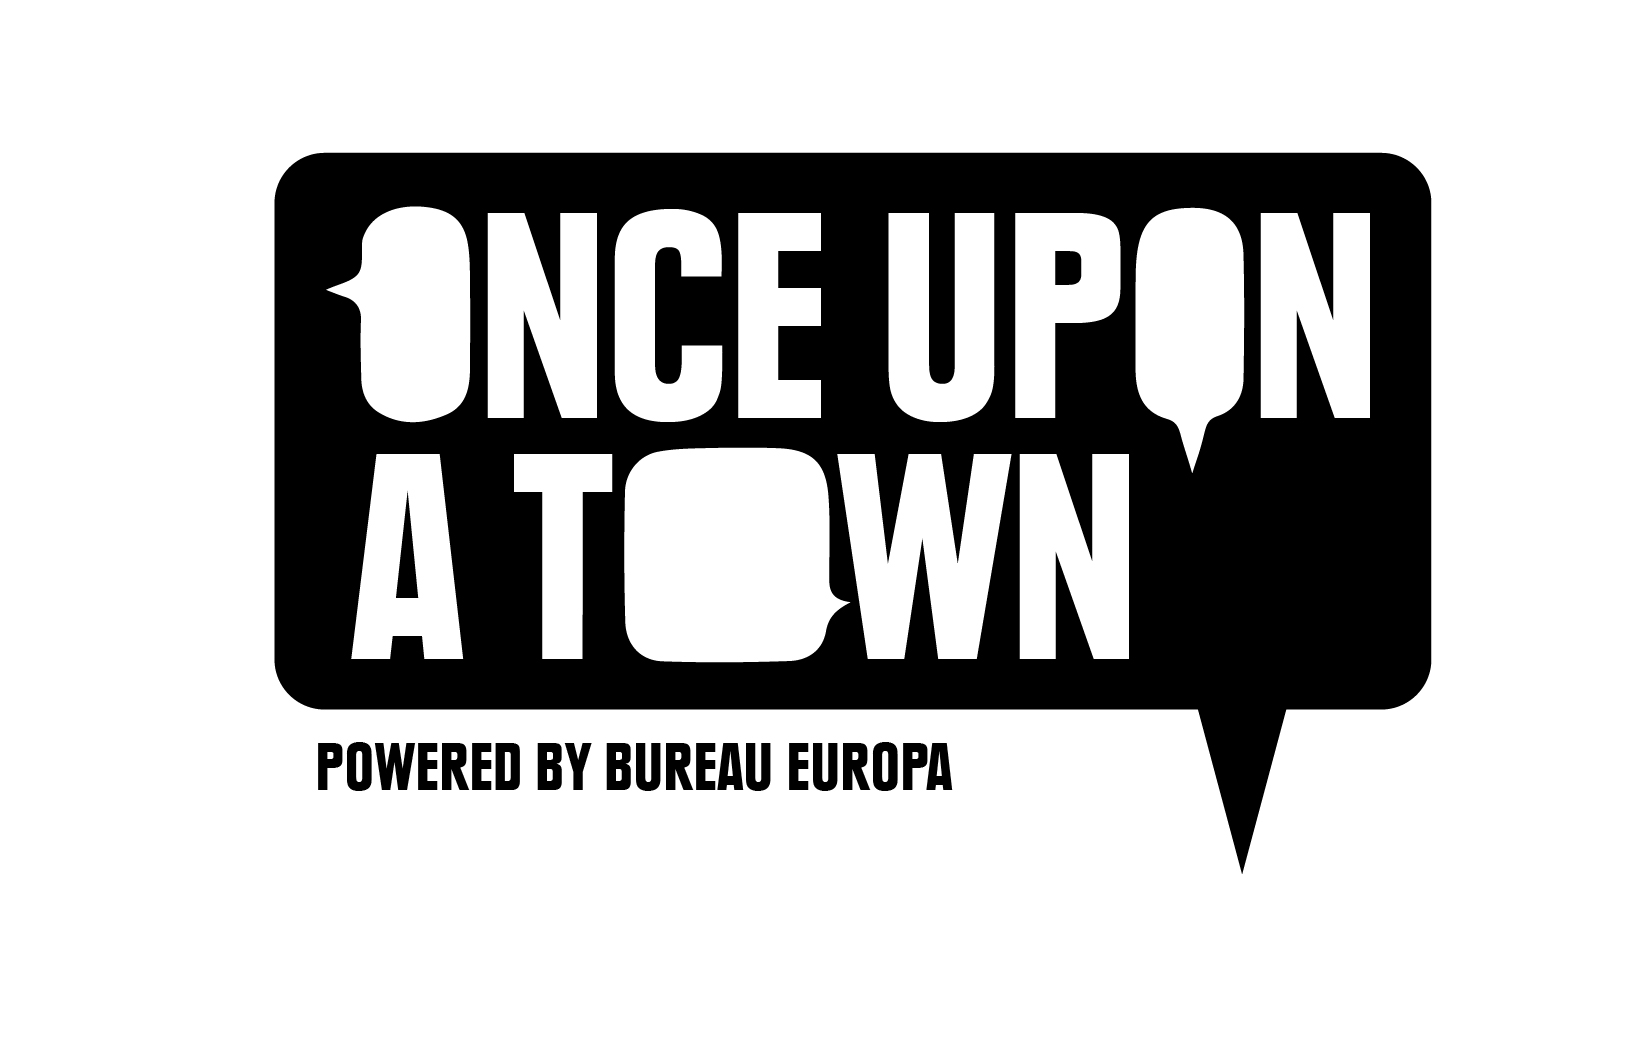 Once upon a town